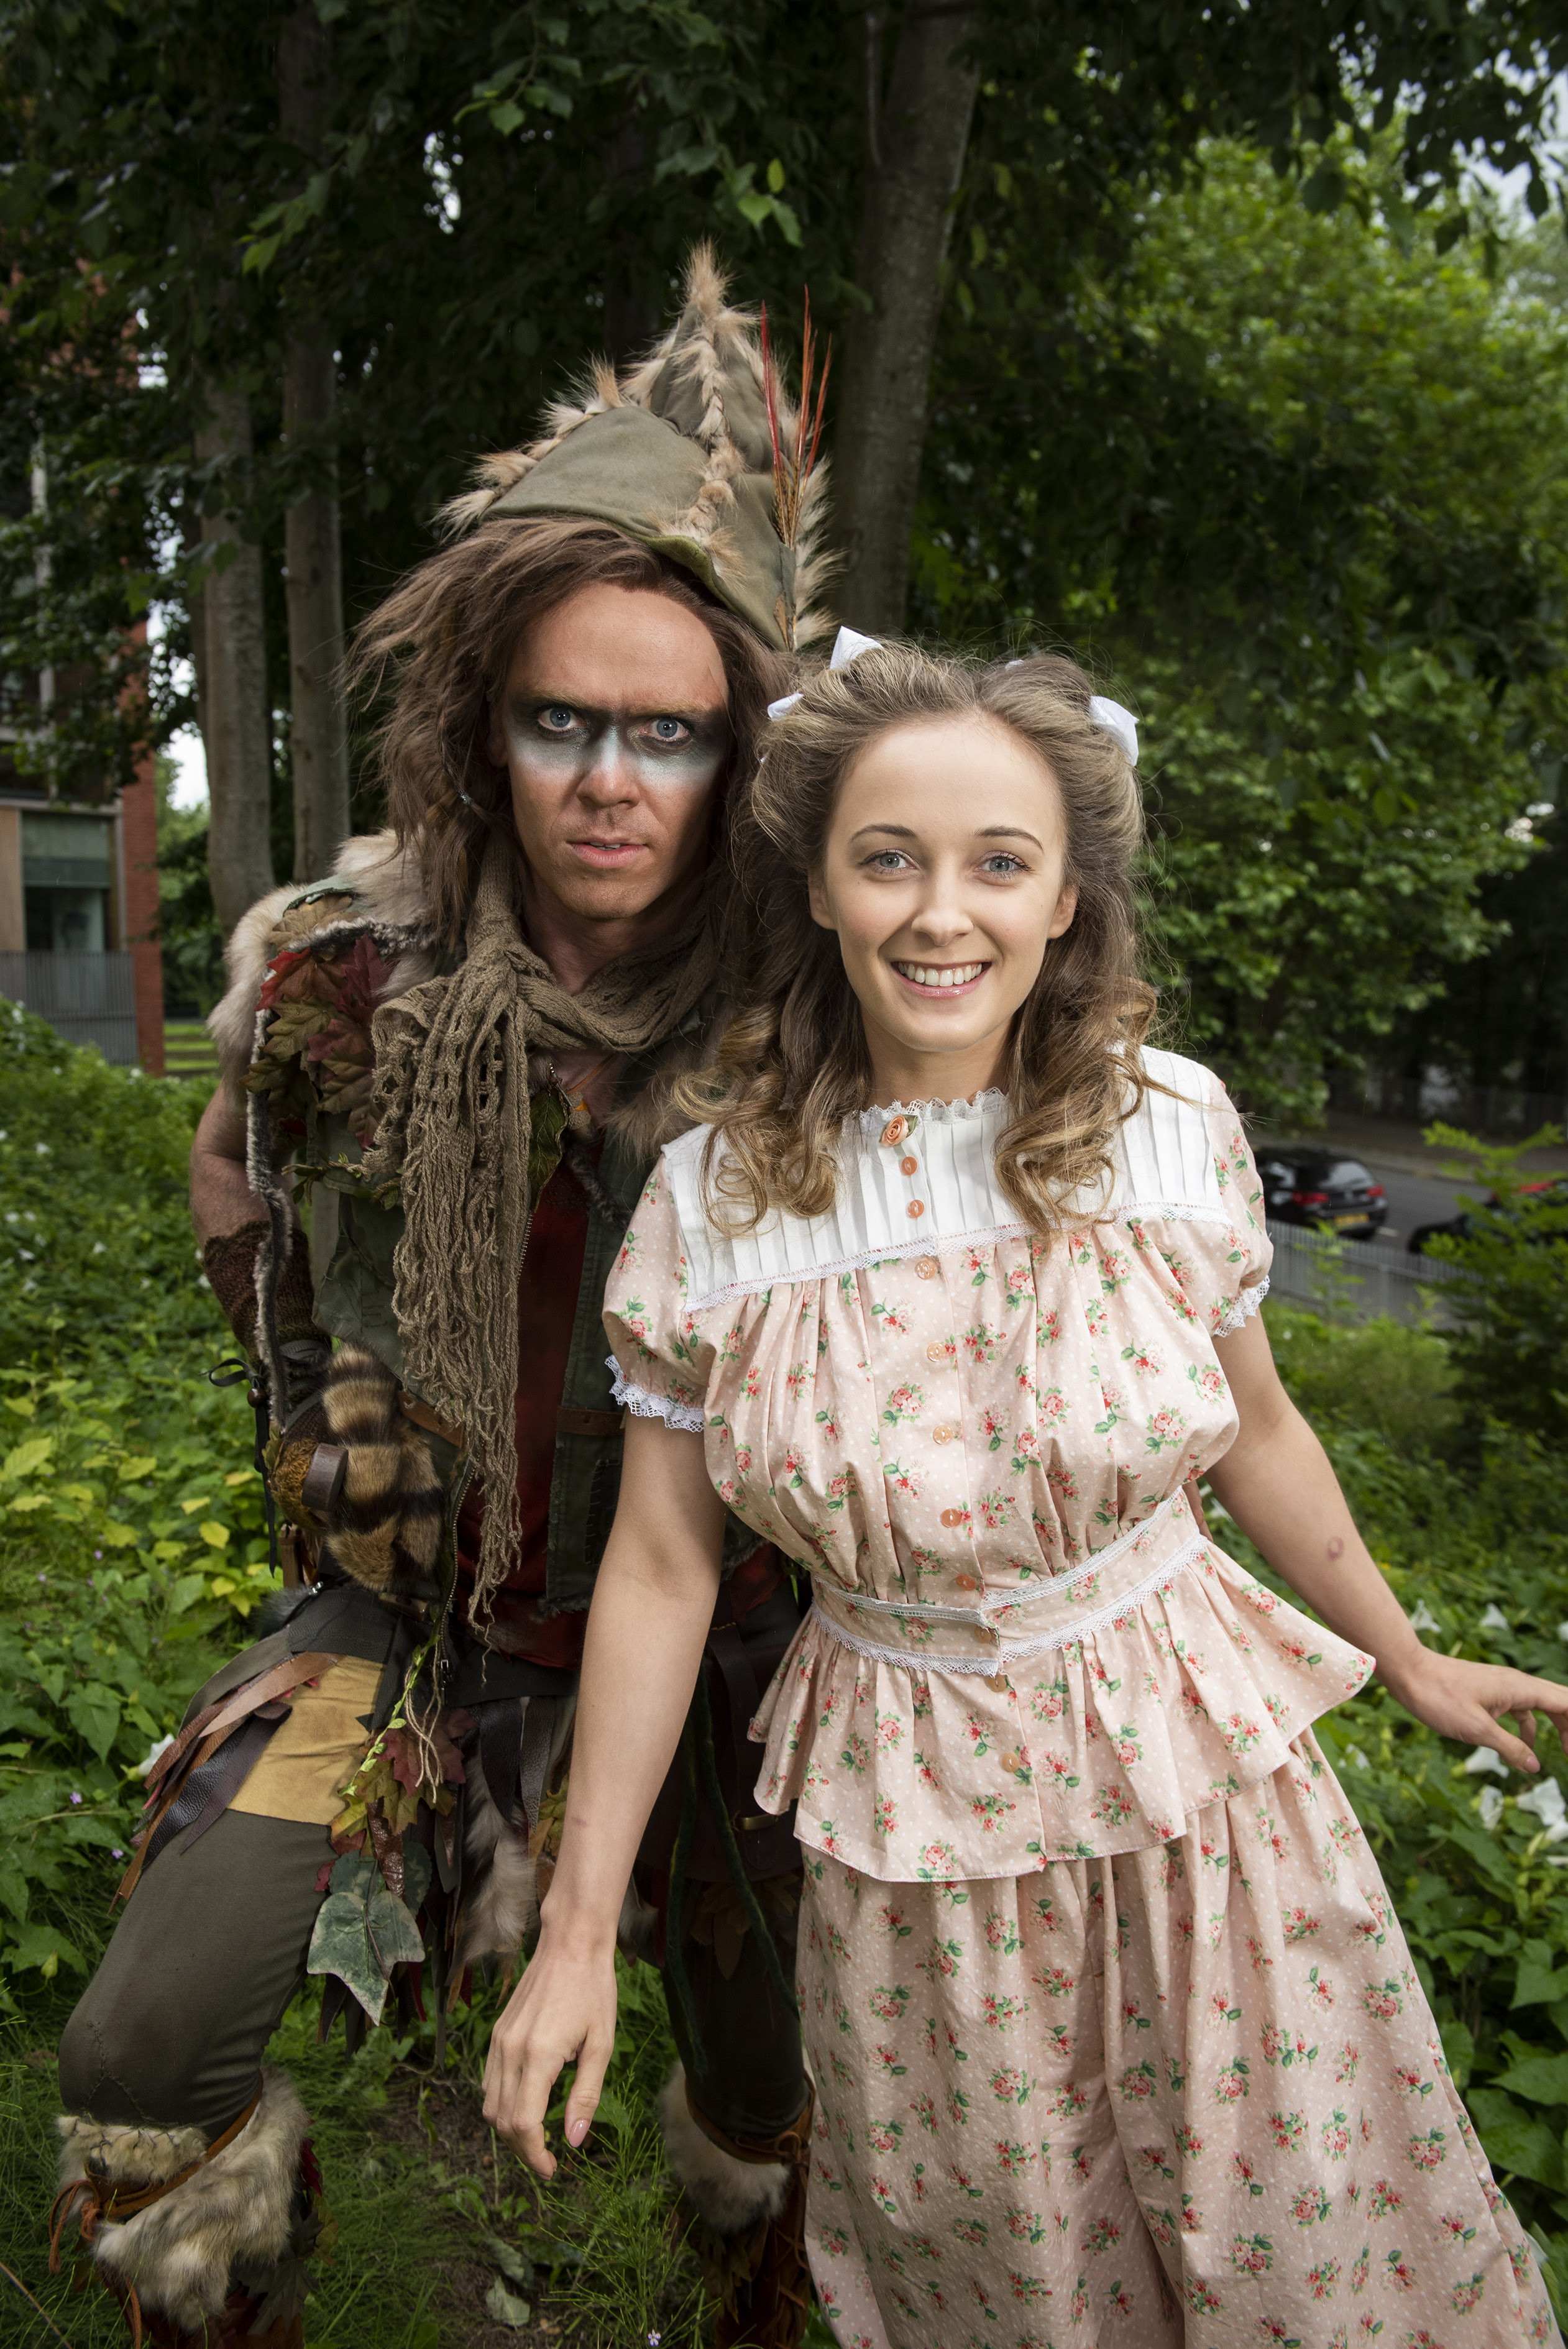 OLLOWING THE LEADER: Michael Mahony as Peter Pan and Rhiannon Chesterman as Wendy